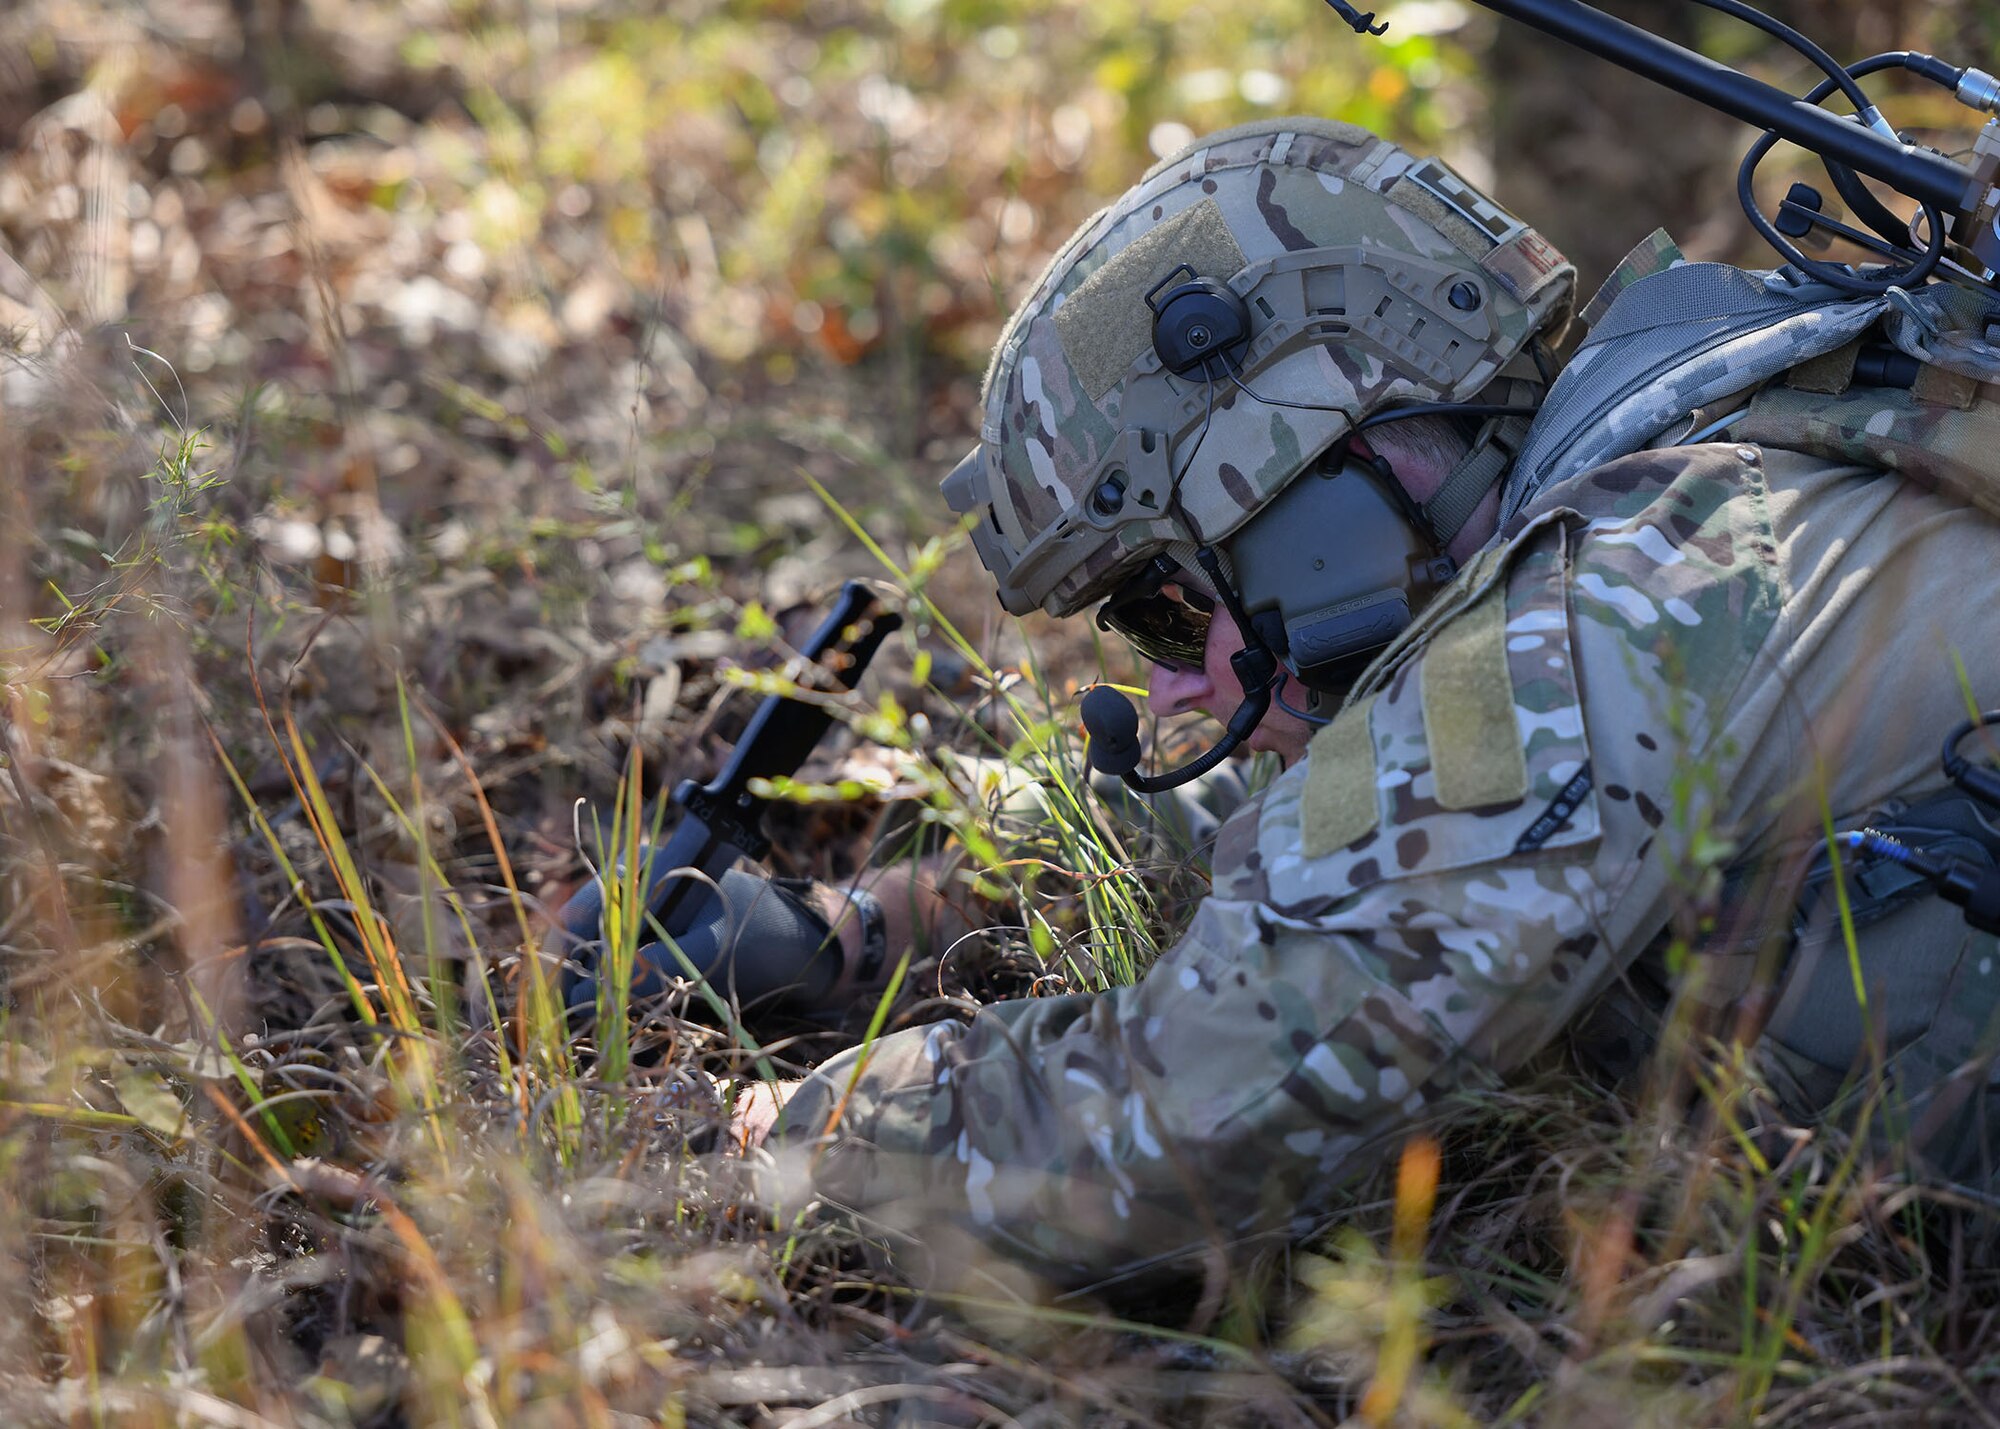 U.S. Air Force Staff Sgt. Htyler Kelley, 19th Civil Engineer Squadron Explosive Ordnance Disposal technician, uncovers a simulated improvised explosive device during a Joint training exercise at Camp Robinson, Arkansas, Oct. 22, 2019.